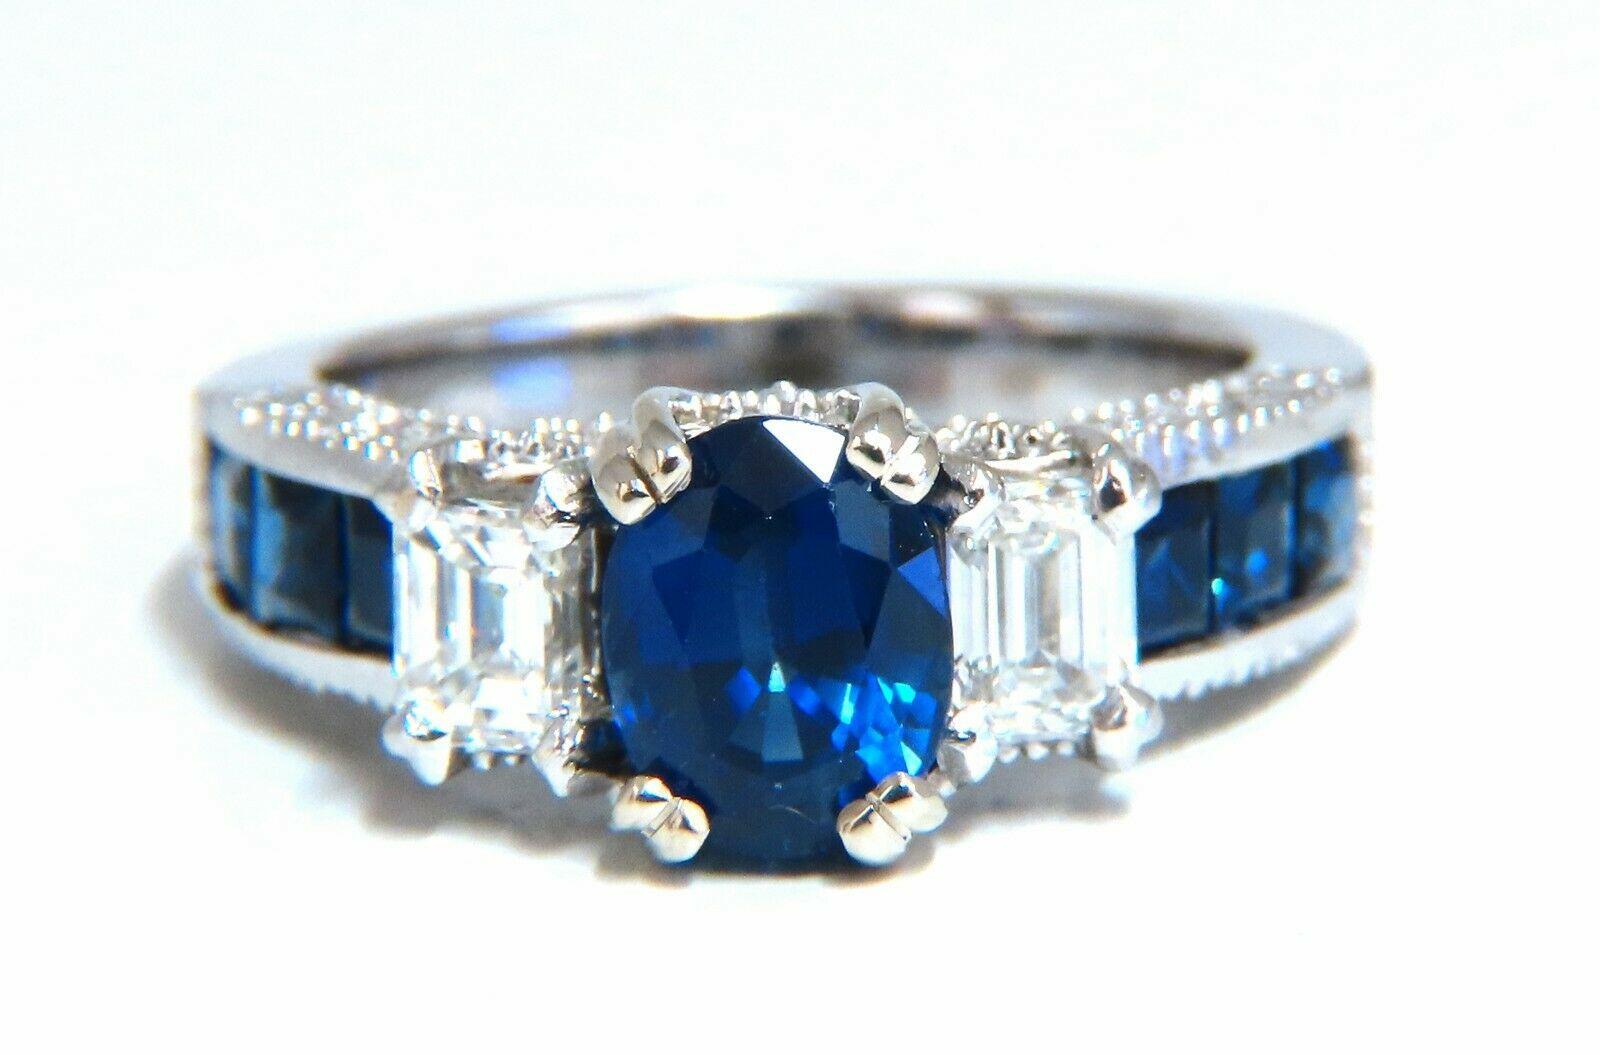 GIA Certified 1.86 Carat Natural Sapphire Diamonds Ring & Matching Eternity Band For Sale 4